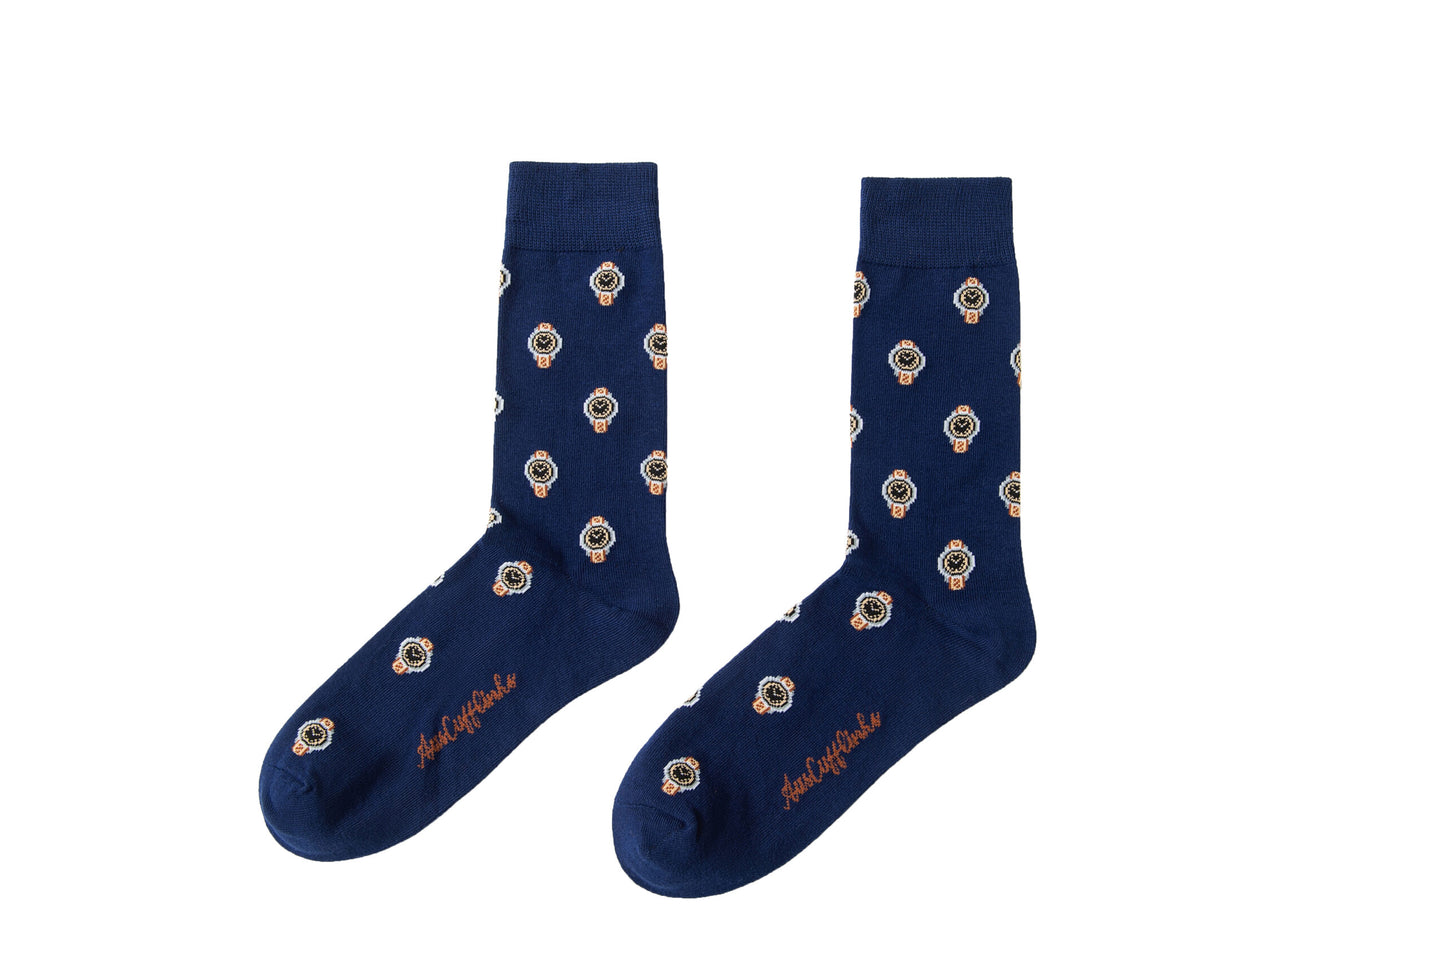 A pair of Watch socks with timeless floral patterns and the text "lucky me" embroidered in gold, displayed against a white background.